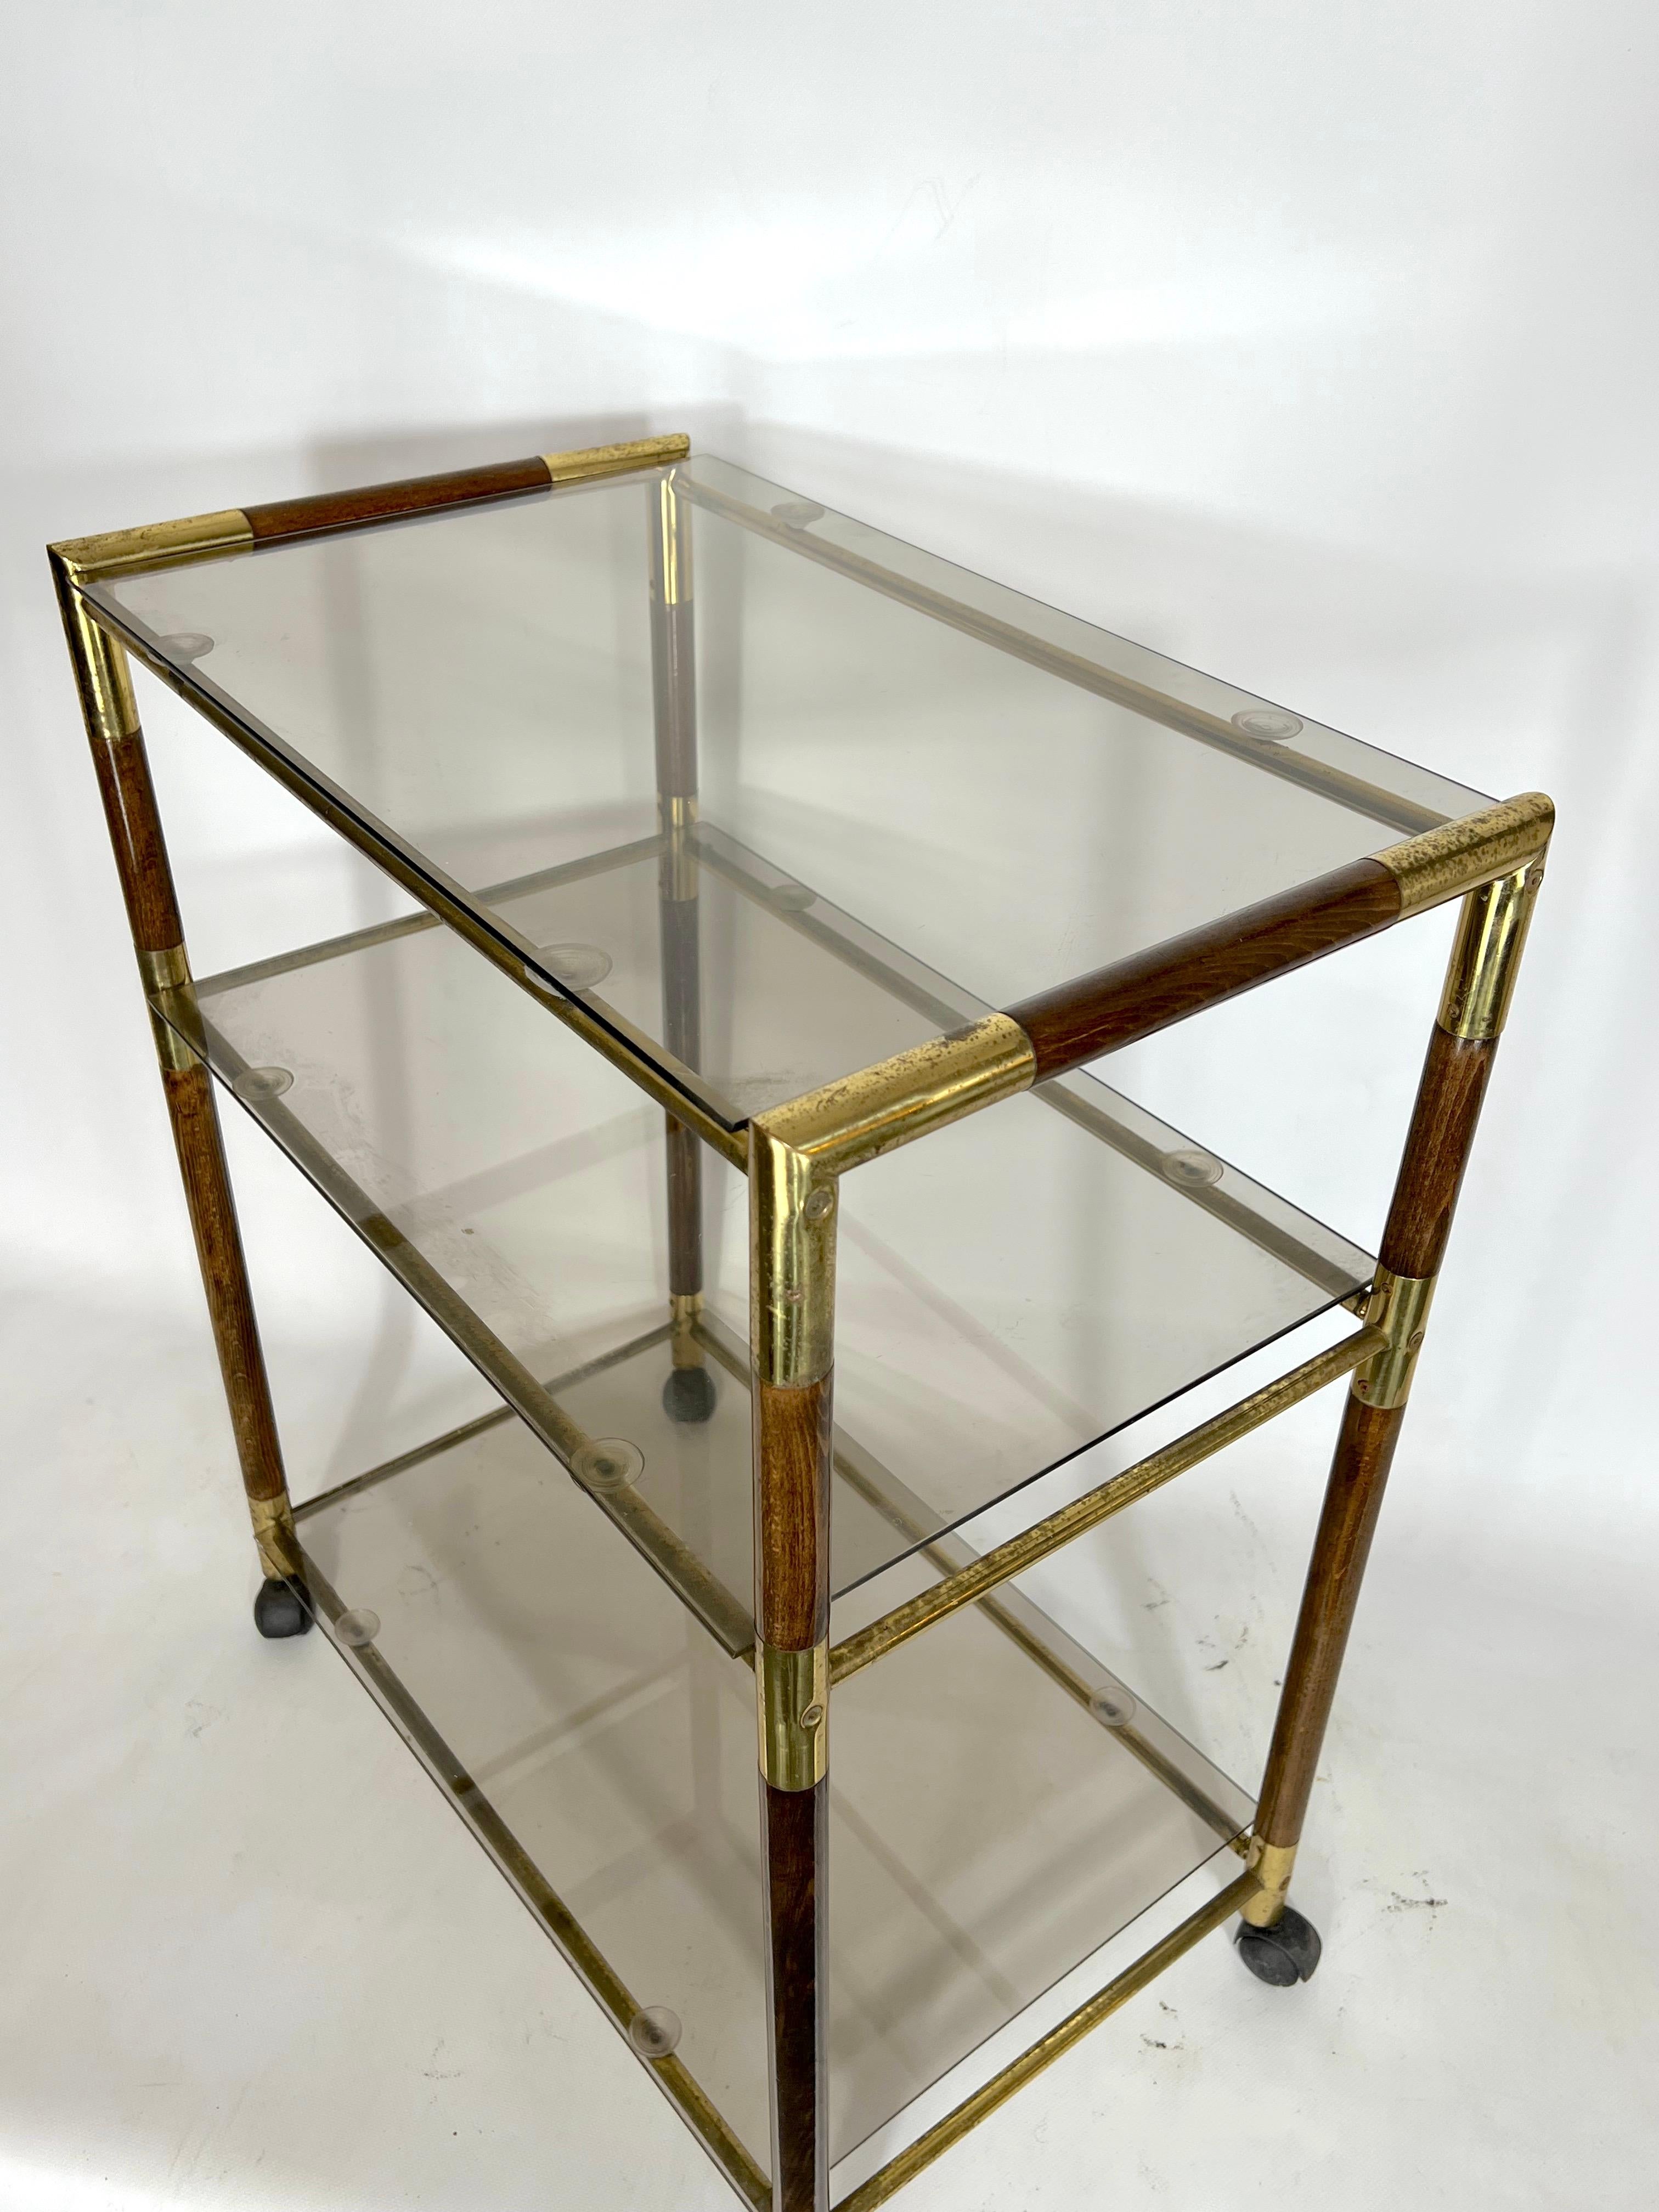 Vintage Three Shelves Brass and Wood Trolley or Bar Cart by Tommaso Barbi, 1970s For Sale 3